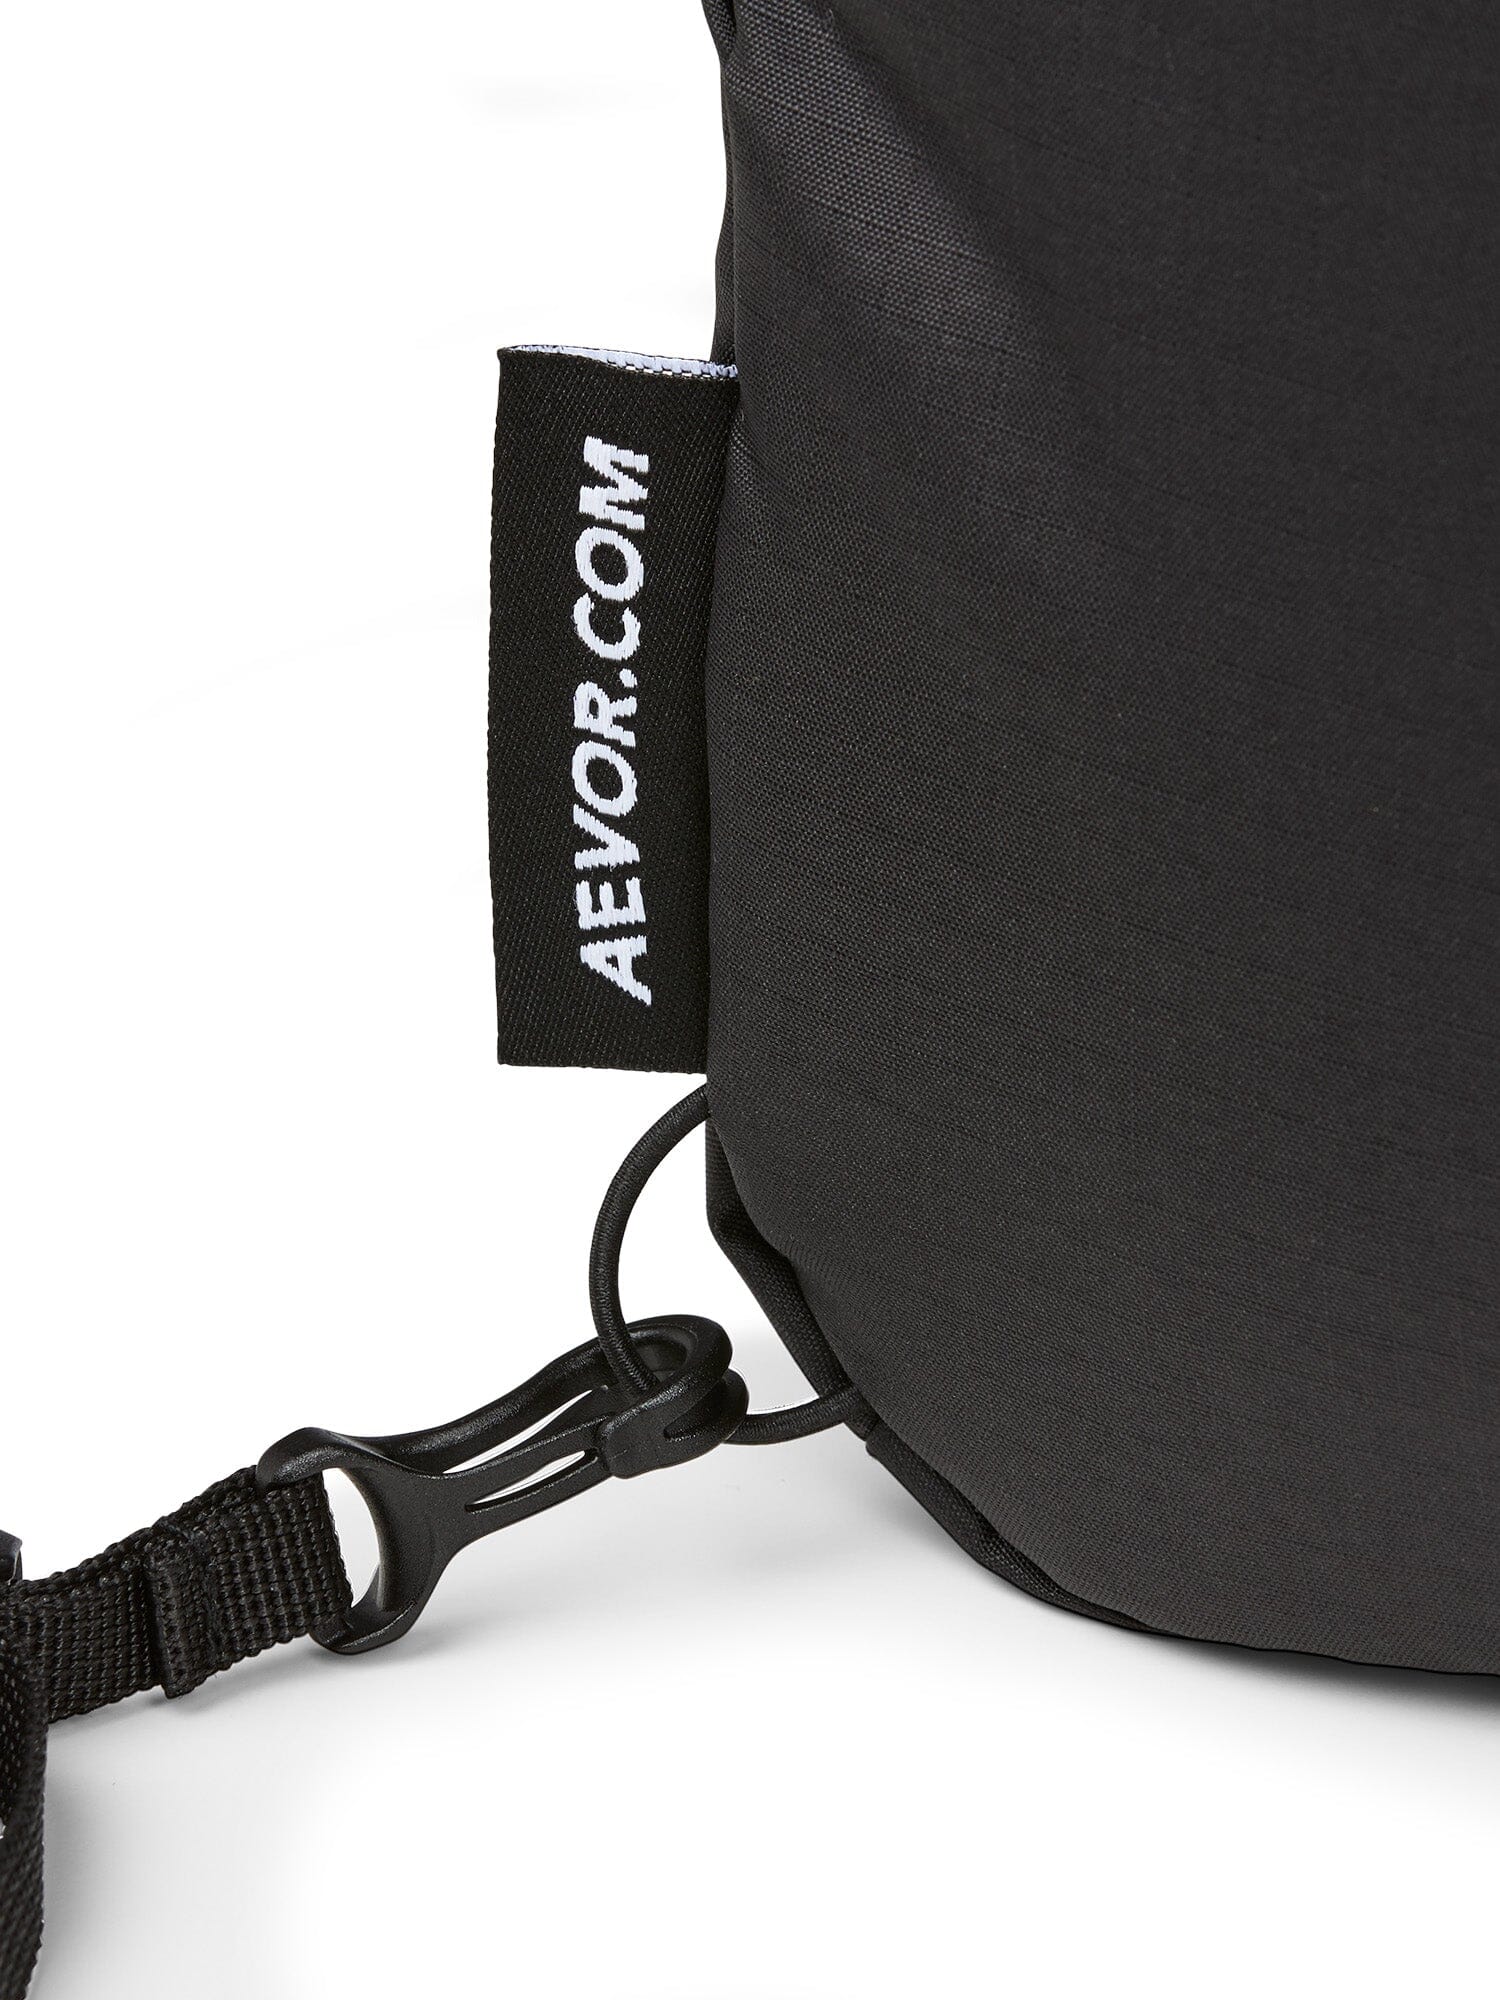 Aevor Sacoche Bag - Made from Recycled PET-bottles Ripstop Black Bags